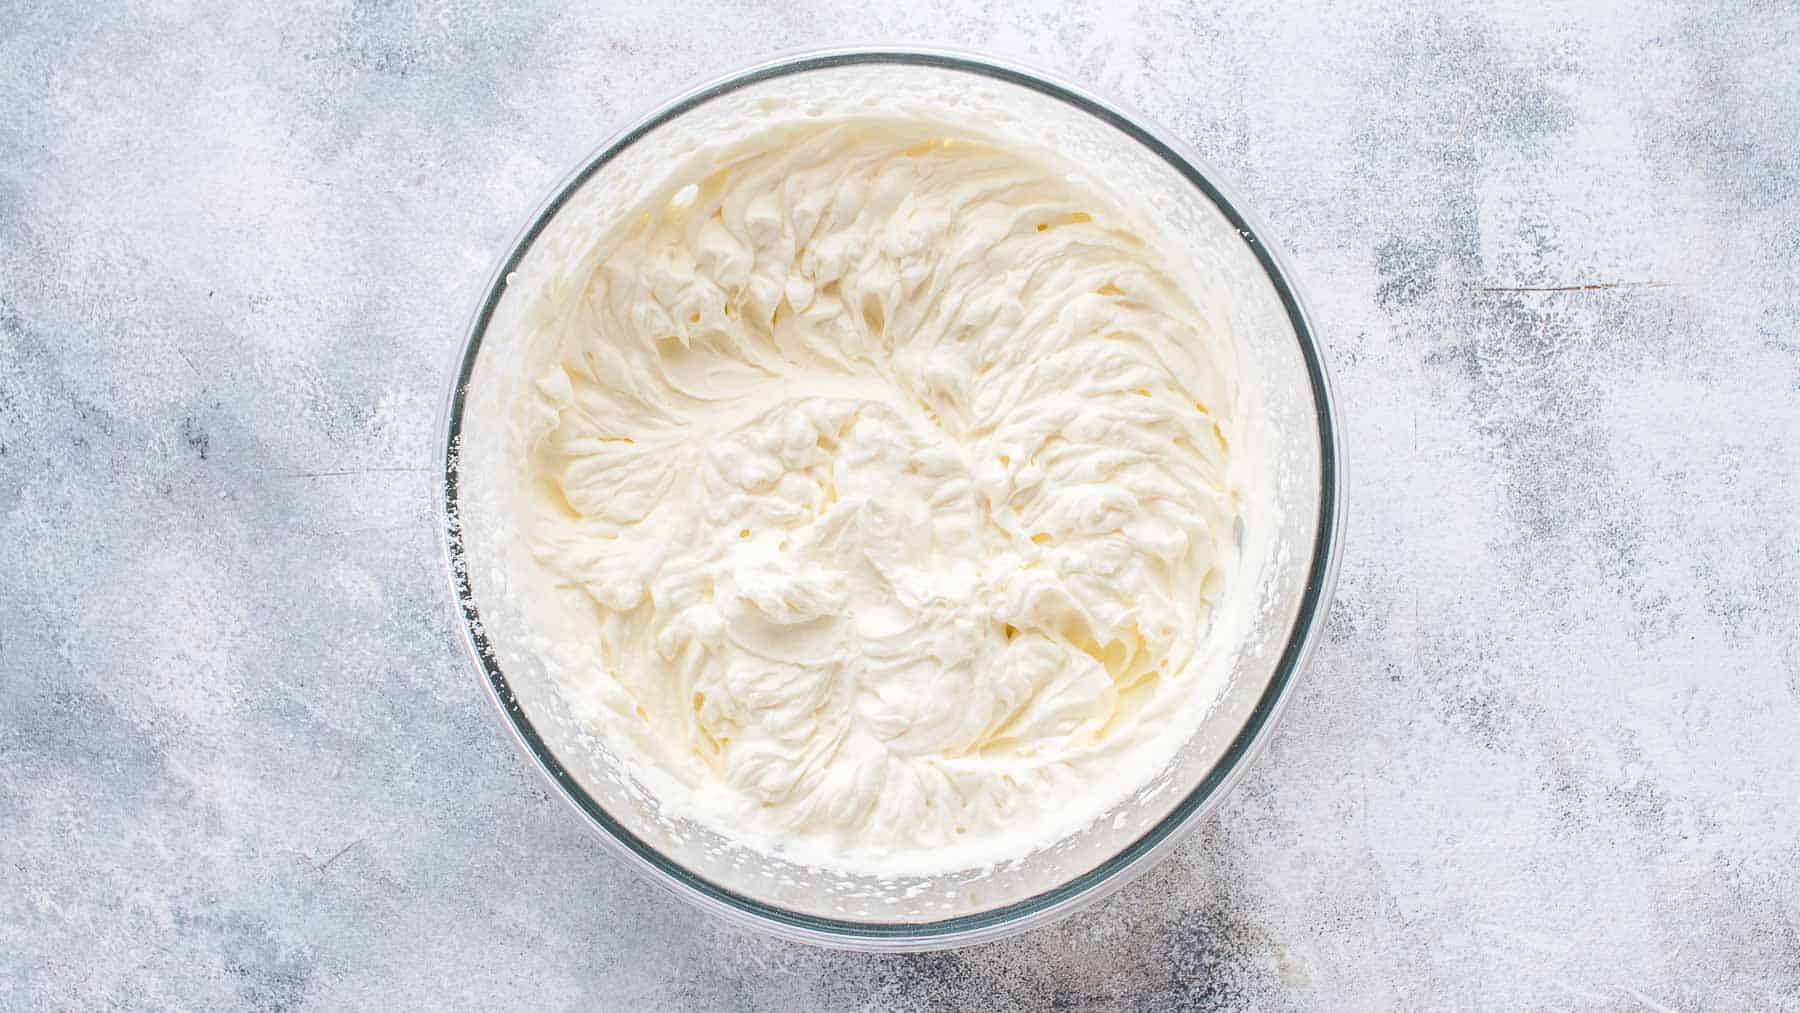 stabilized whipped cream in a mixing bowl